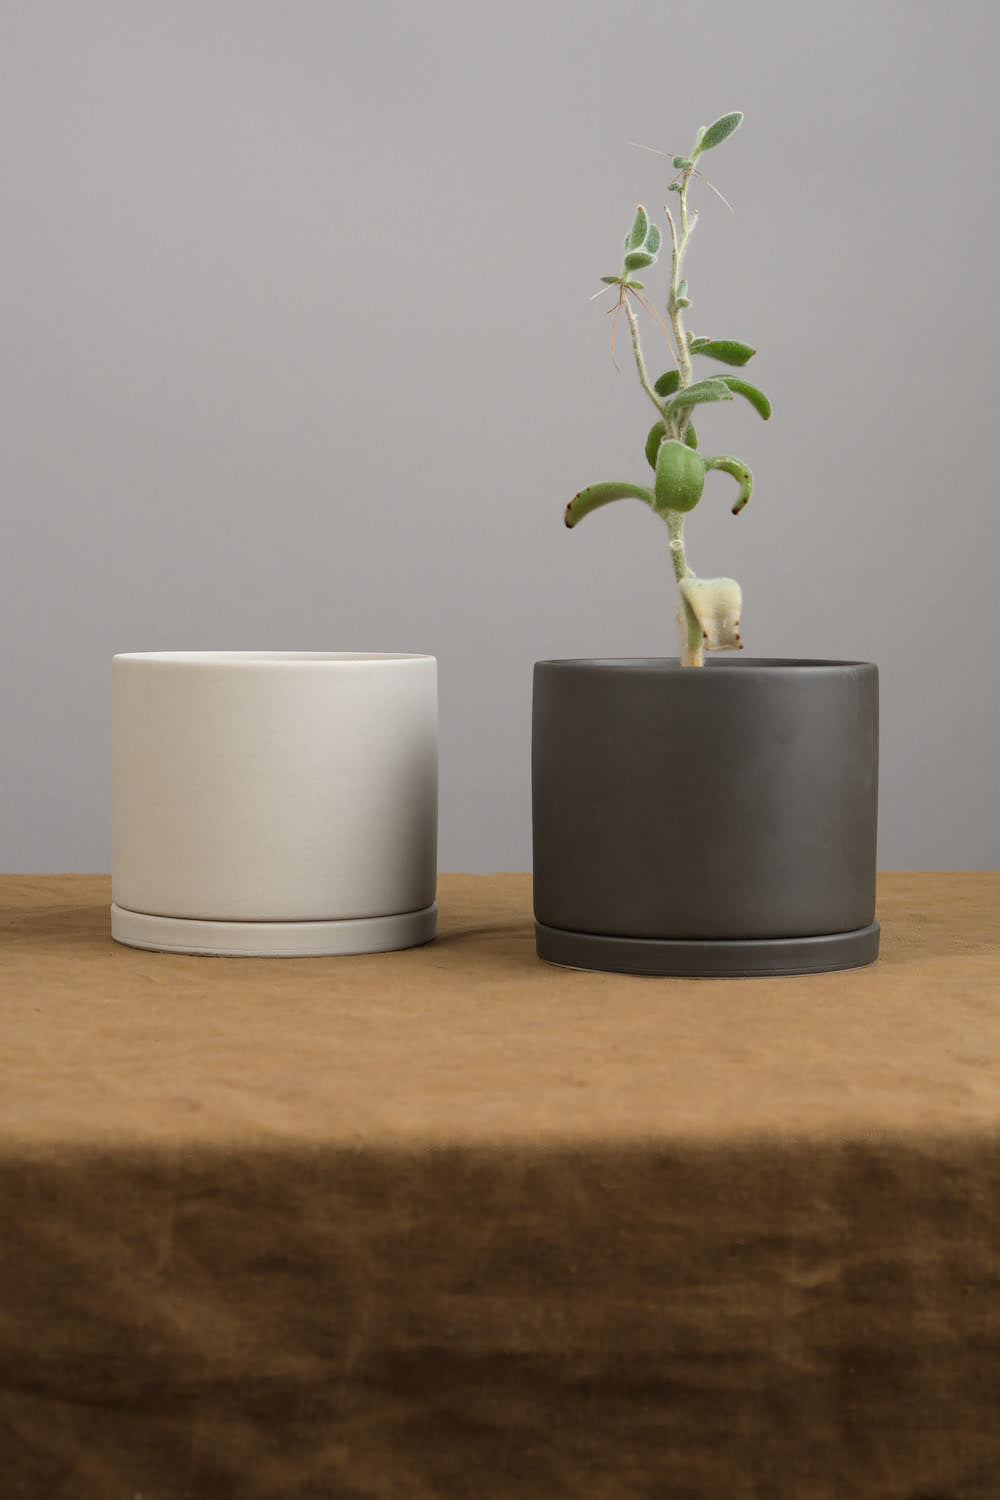 4" Plant Pots on table